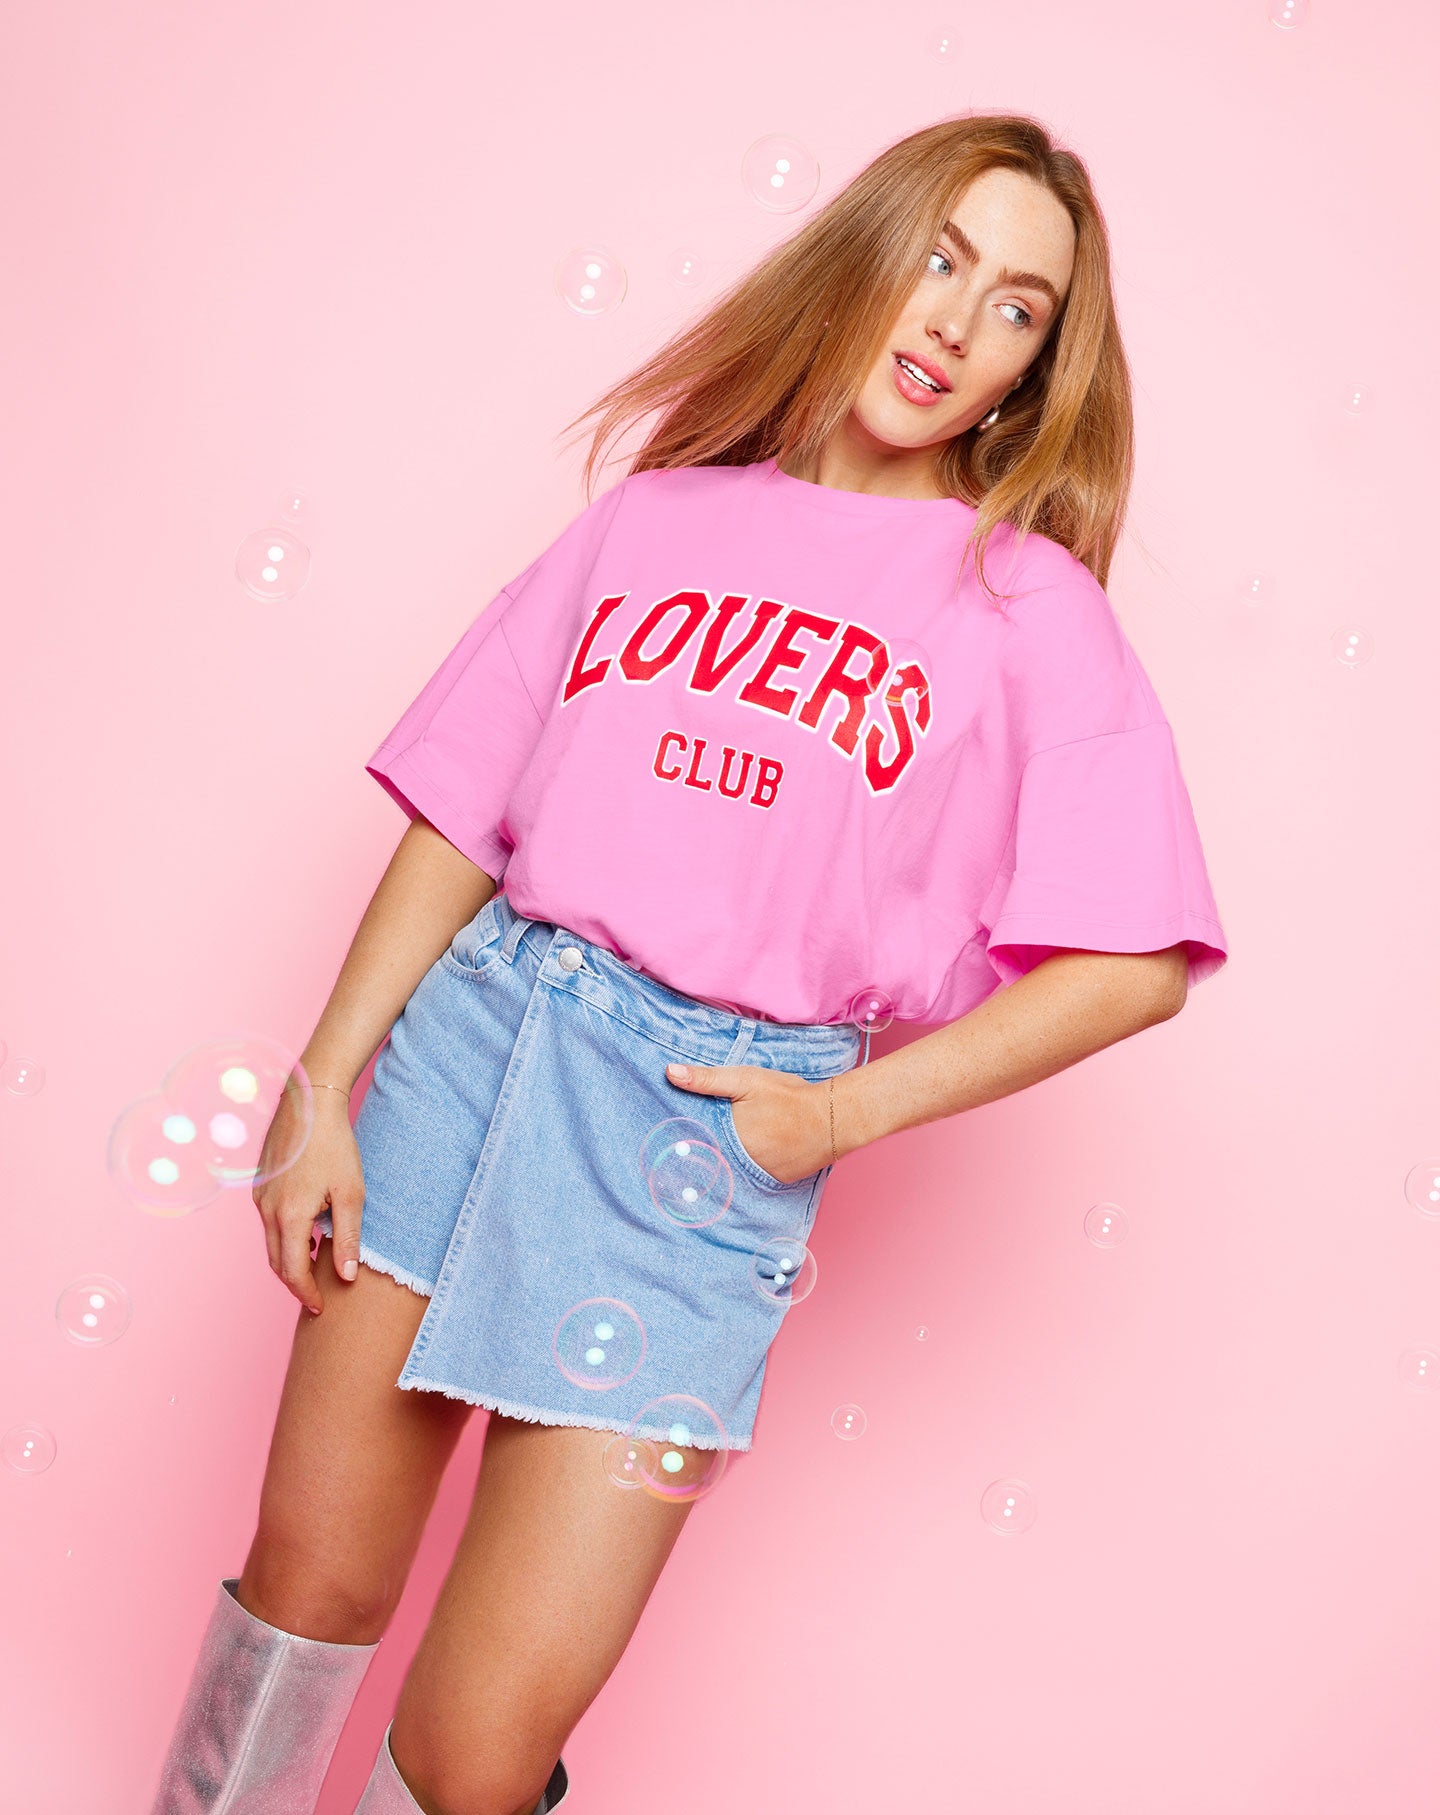 LOVERS CLUB OVERSIZED TEE PINK